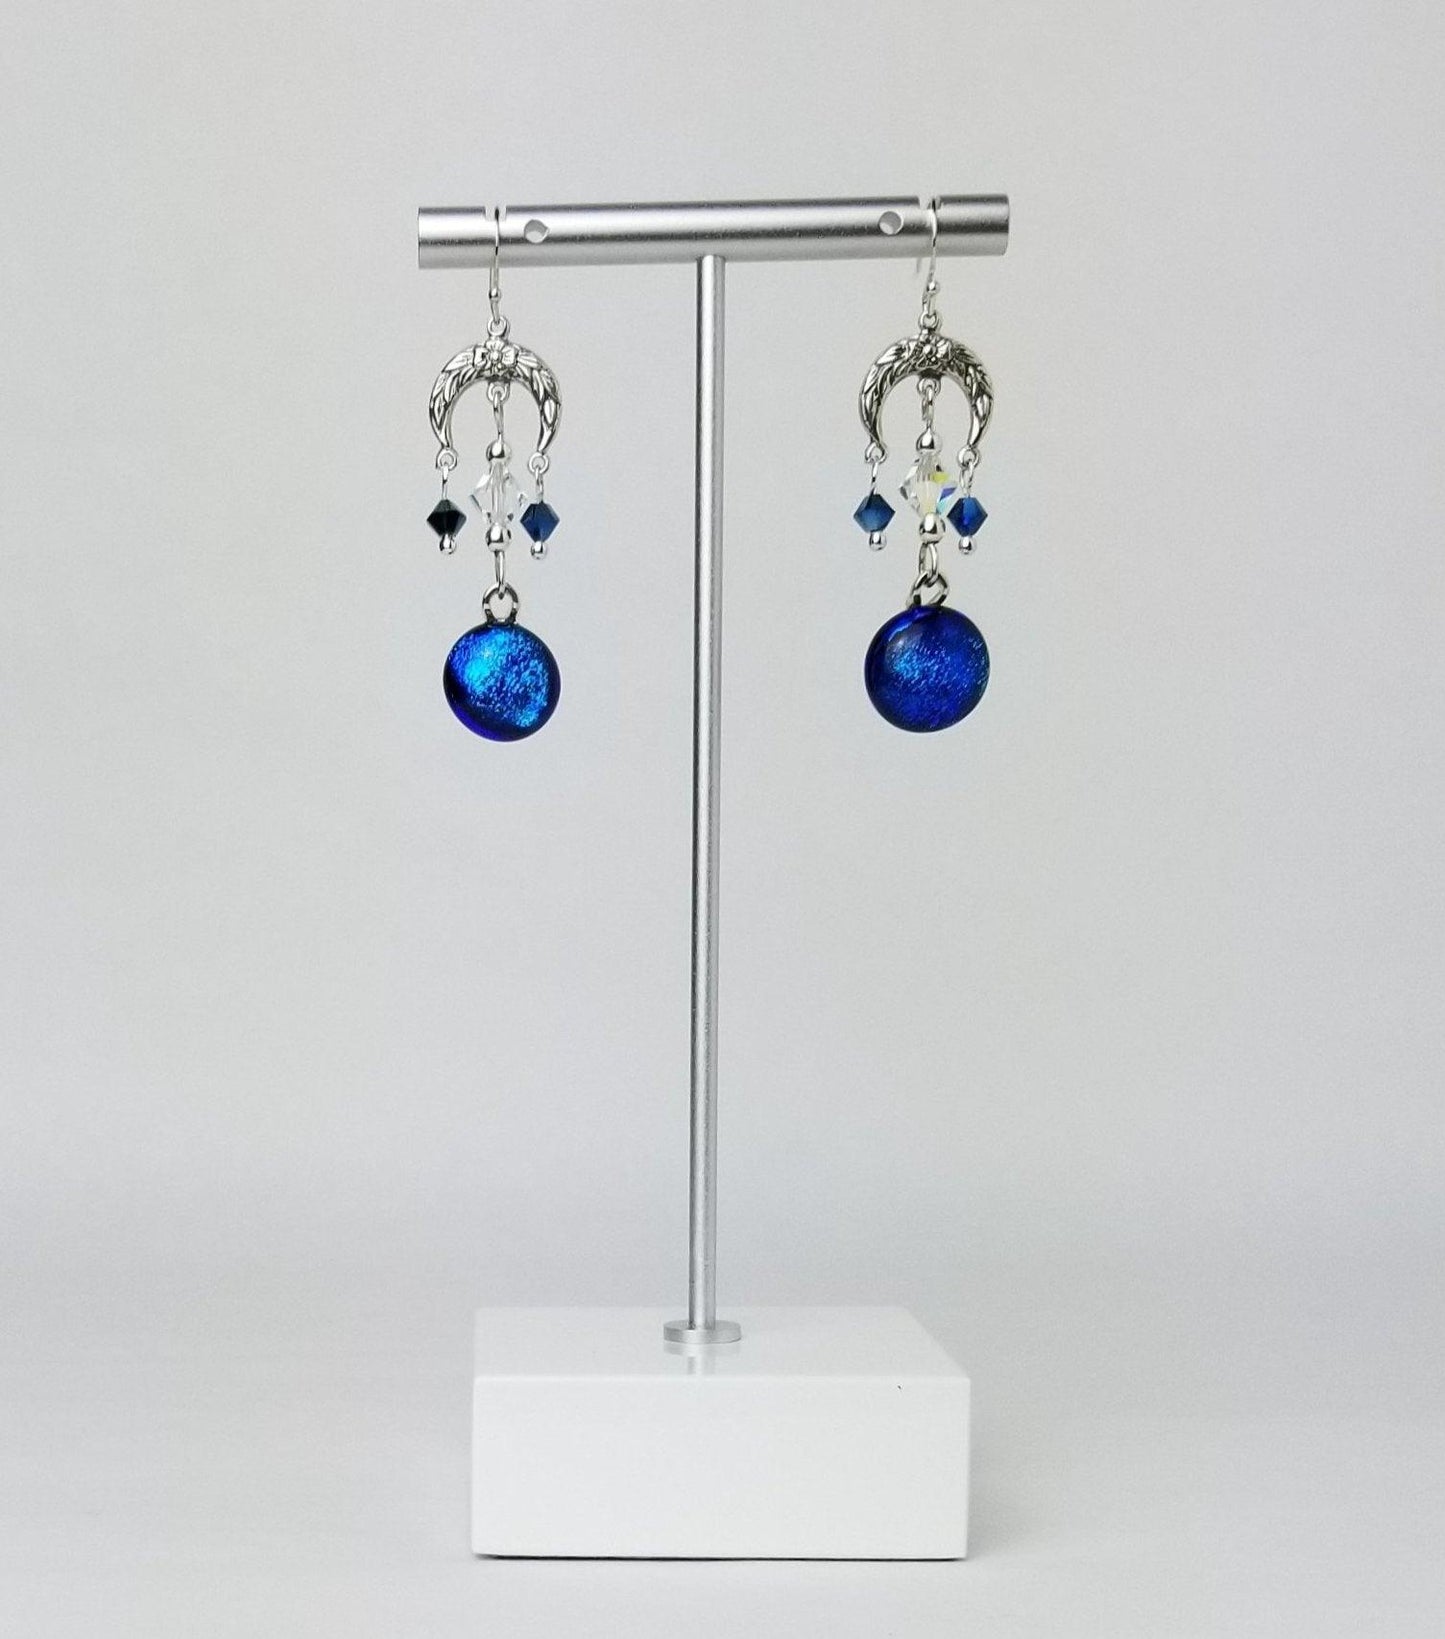 Blue Floral Crescent pireced earrings. Blue dichroic fused glass with Swarovski crystals & sterling silver by Seeds Glassworks, Seedsglassworks